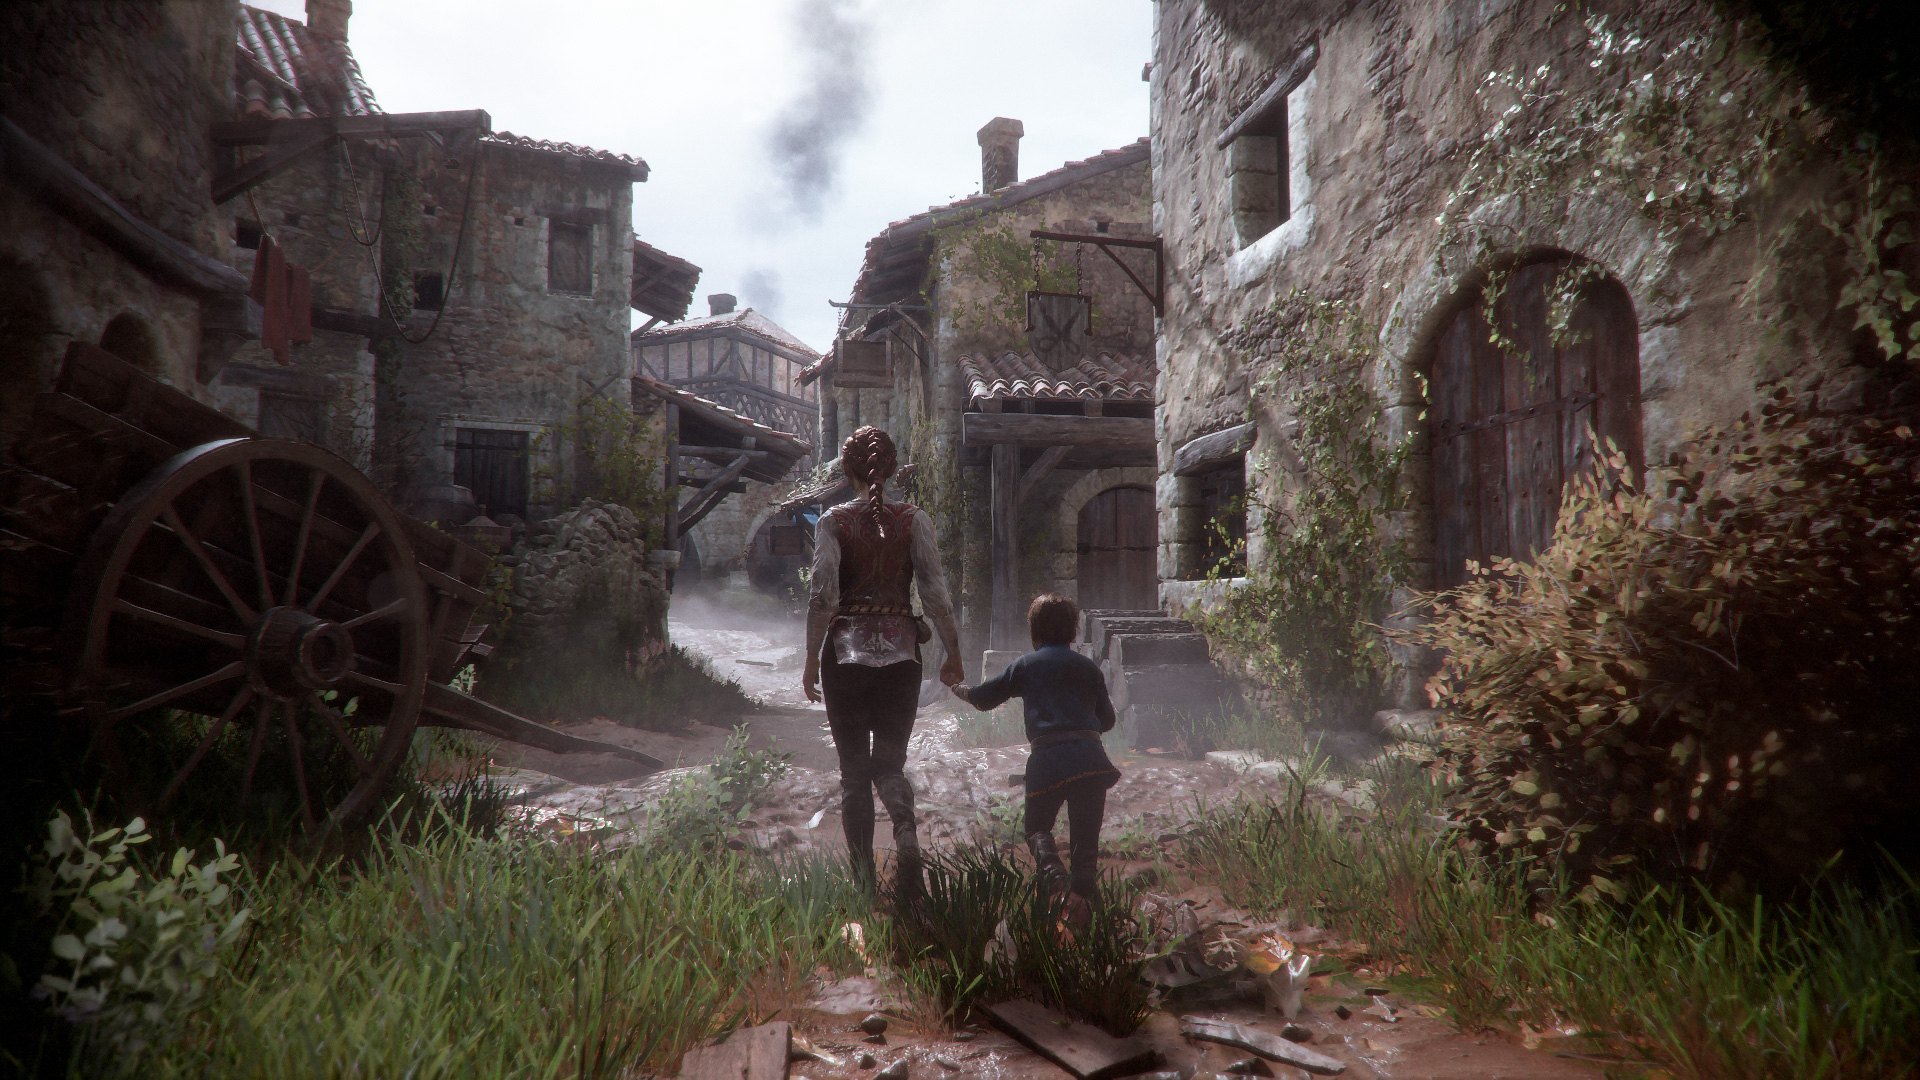 A Plague Tale: Innocence Epic Games Account